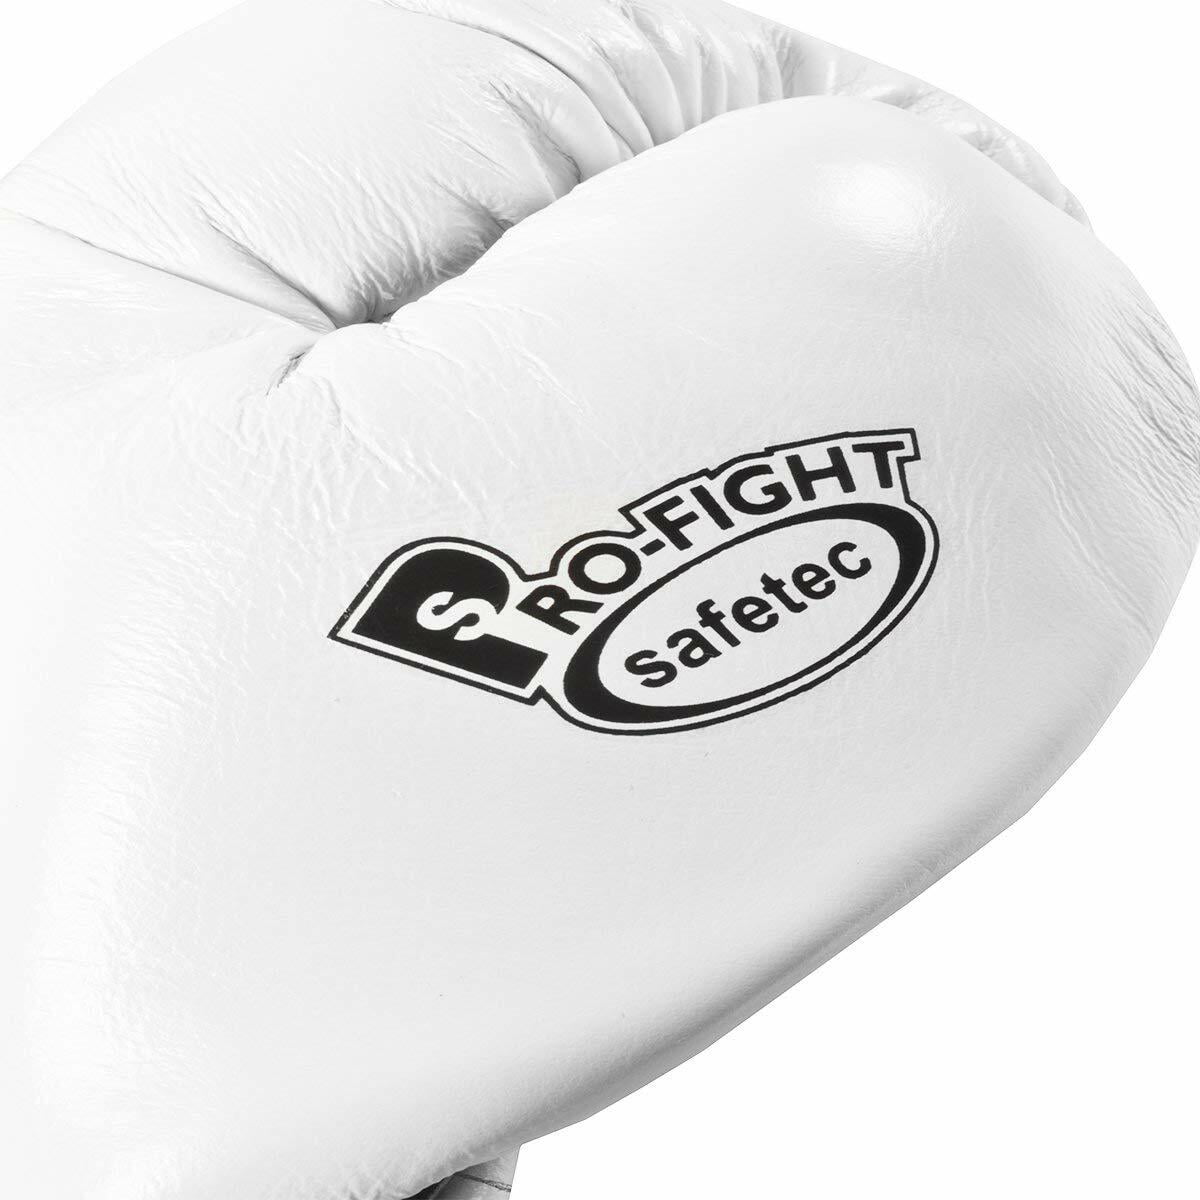 Cleto Reyes Women's Safetec Professional Boxing Fight Gloves - 8 oz. - Pink